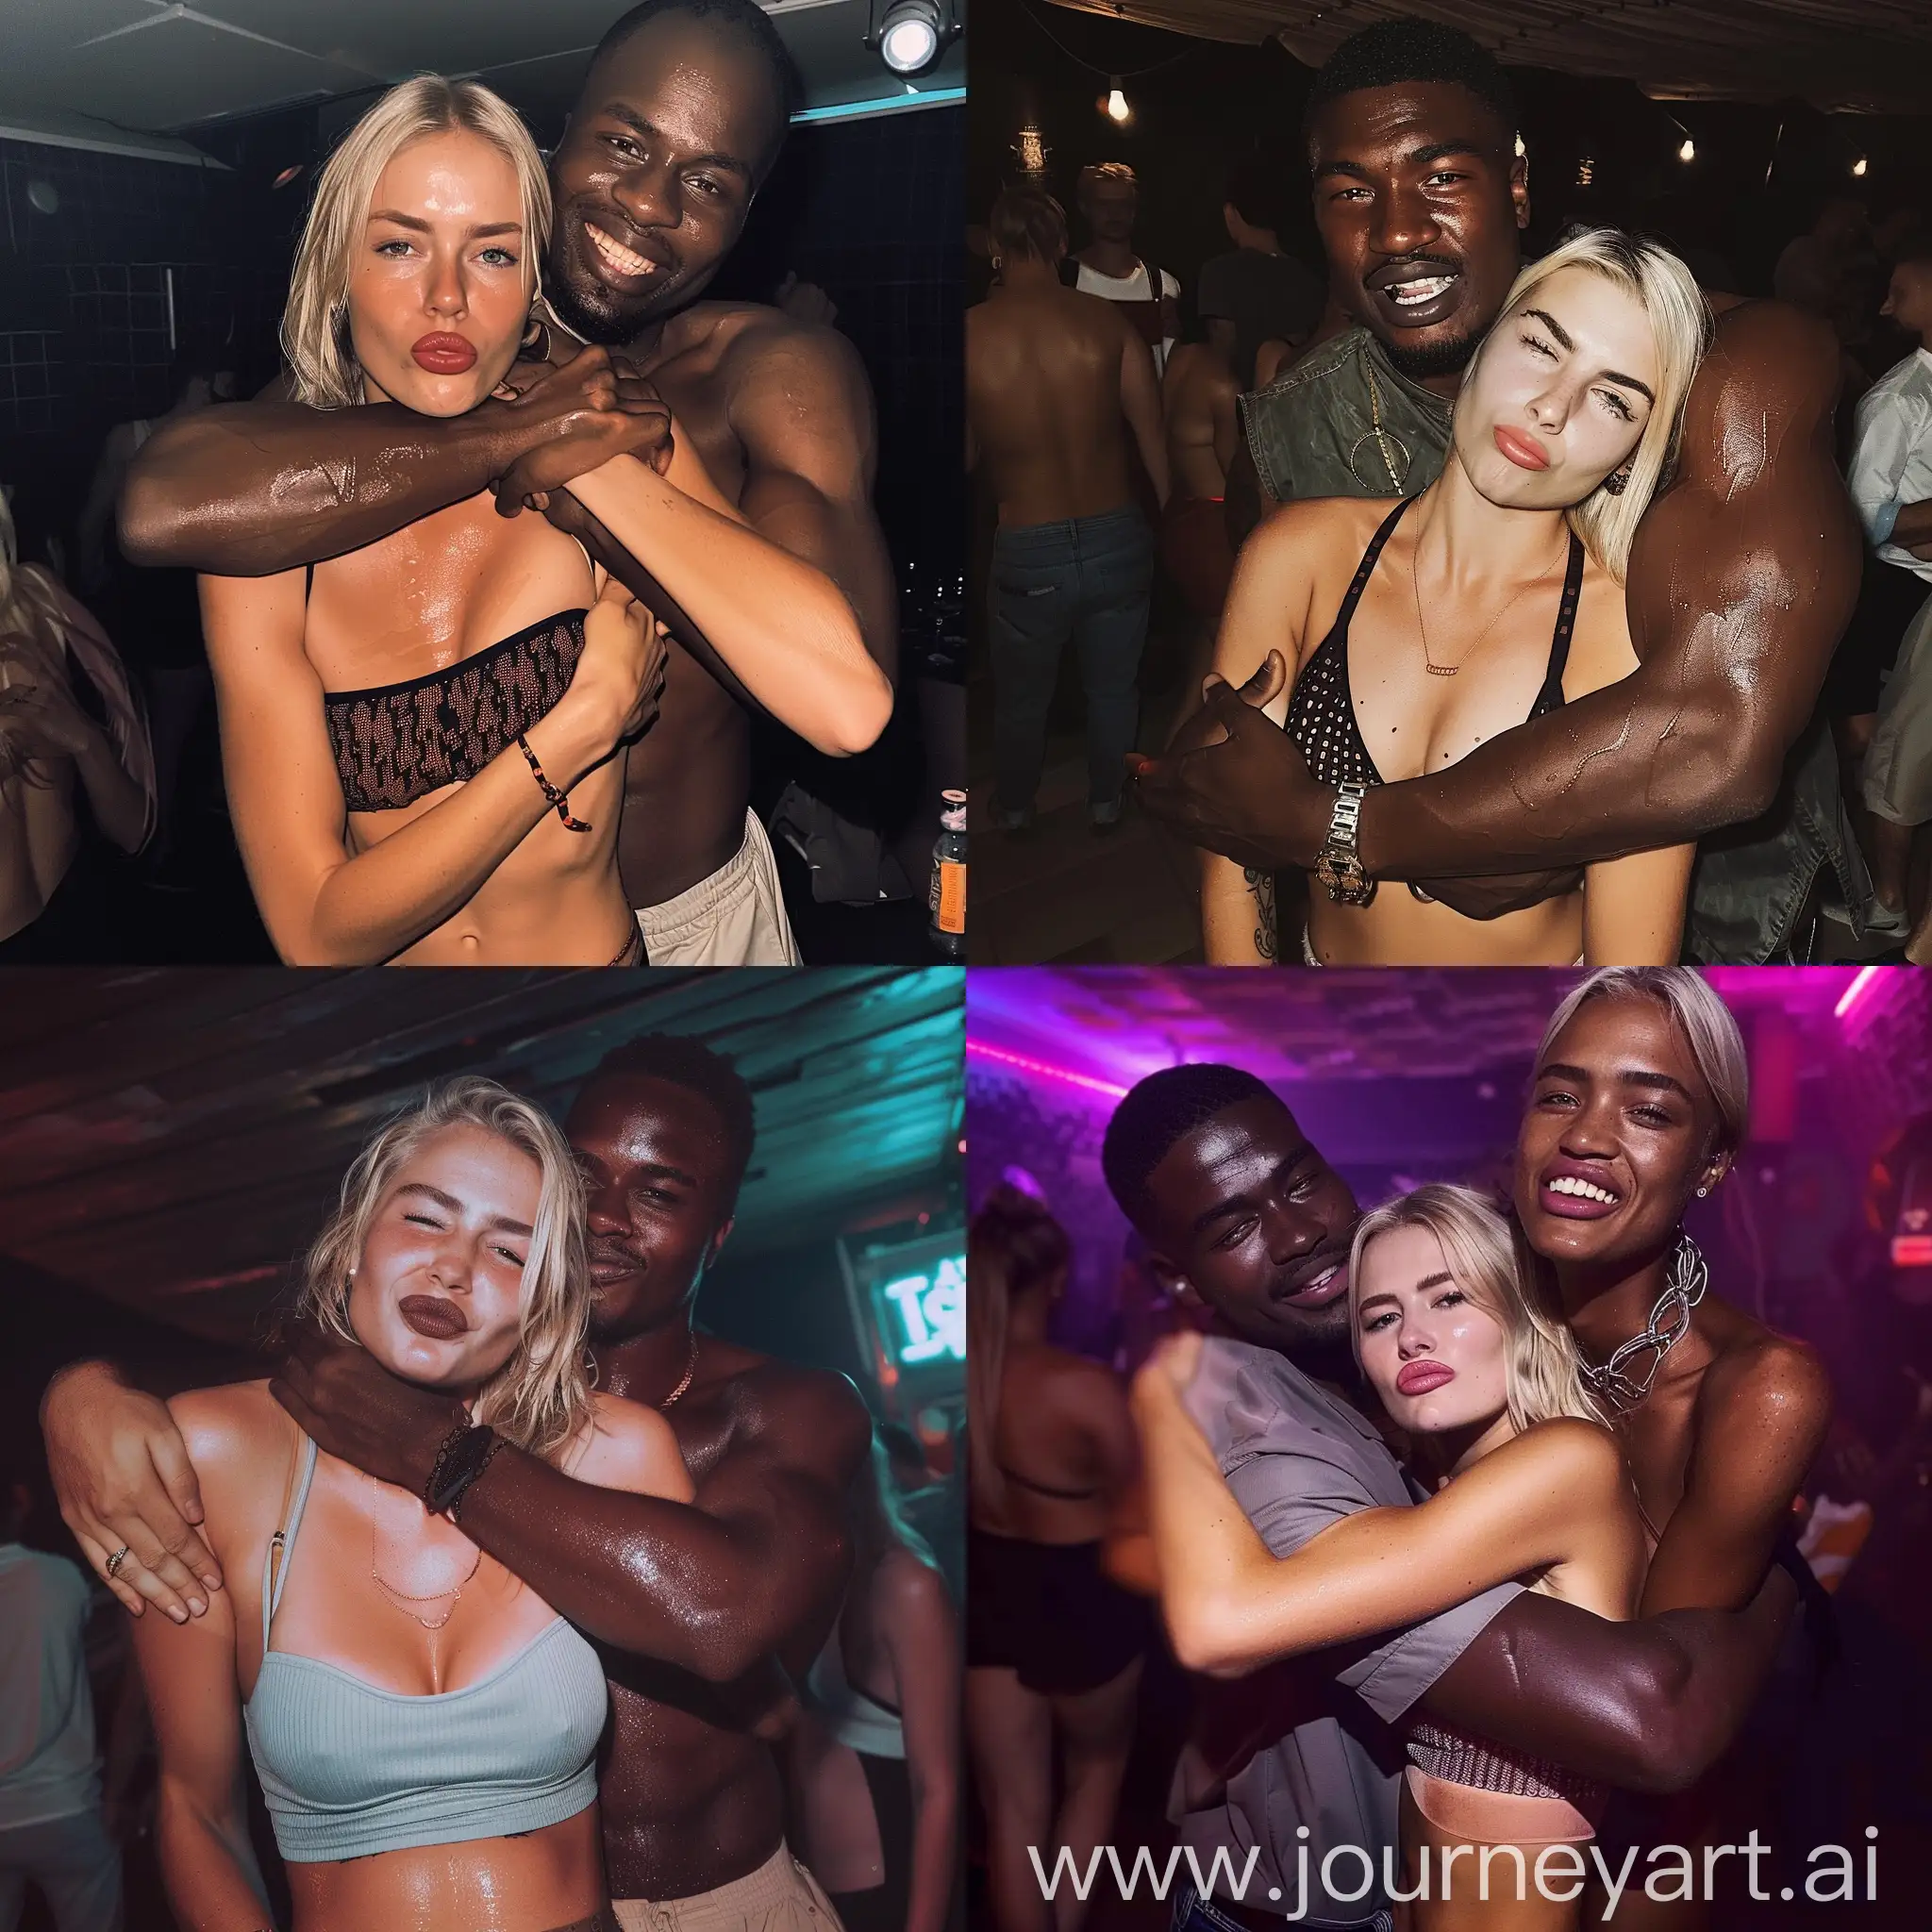 Aesthetic instagram selfie of a danish blonde woman in a party club crop-top getting hugged possessively by her tall robust african partner, she is doing the duck lips pose, her partner is putting her in a chokehold and smiling, the woman is beautiful and looks typically danish, both are looking at the camera, sweaty and flirty